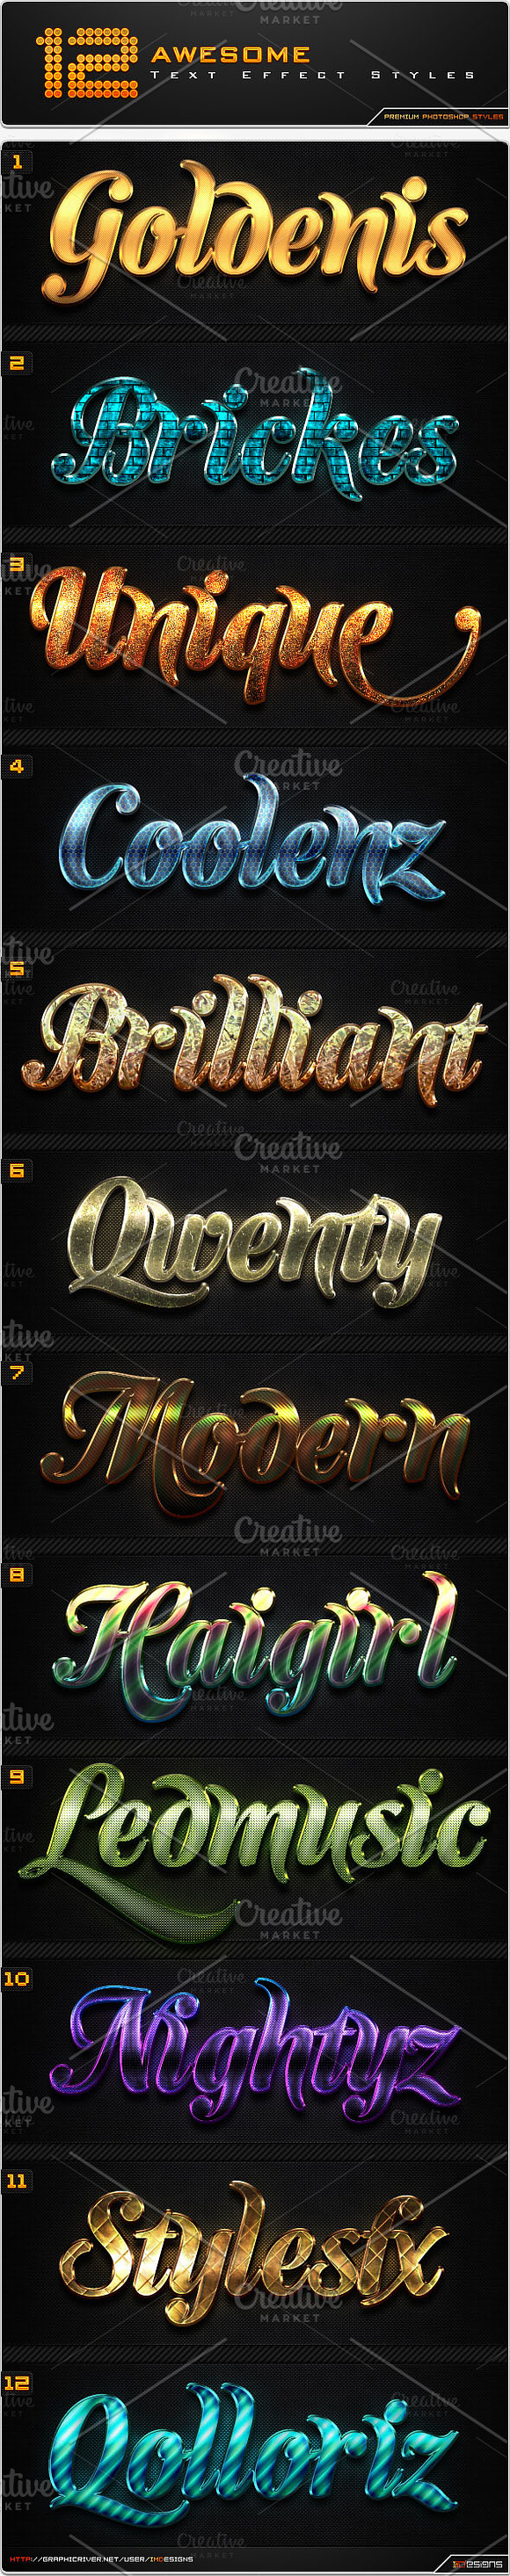 60 Premium Text Effect Styles in Photoshop Layer Styles - product preview 1